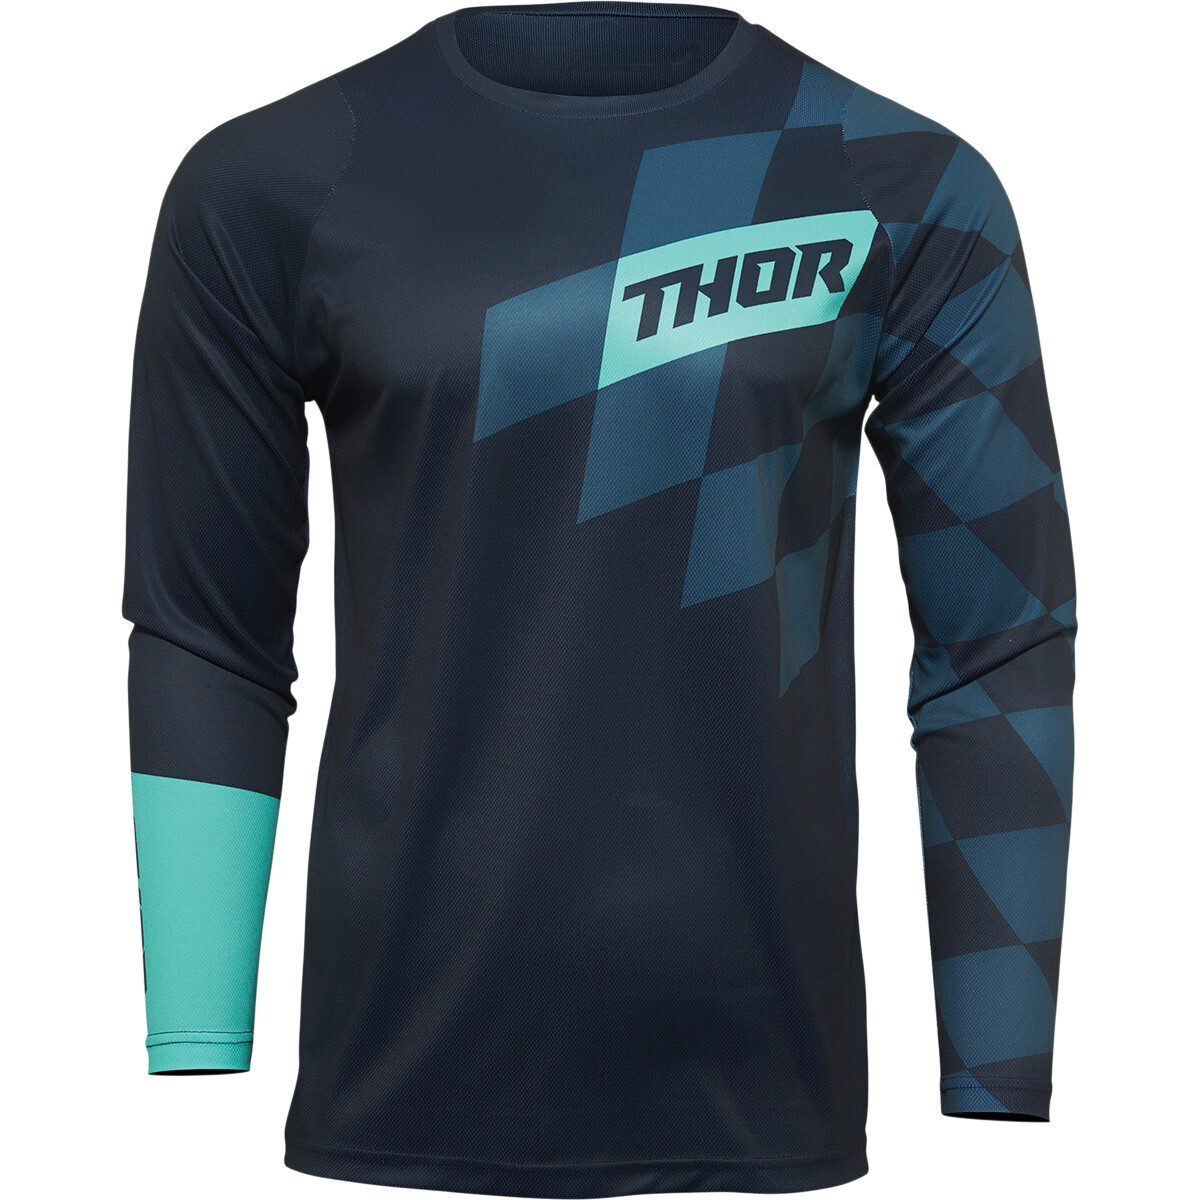 THOR
Youth Sector Bird Jersey - Midnight/Mint